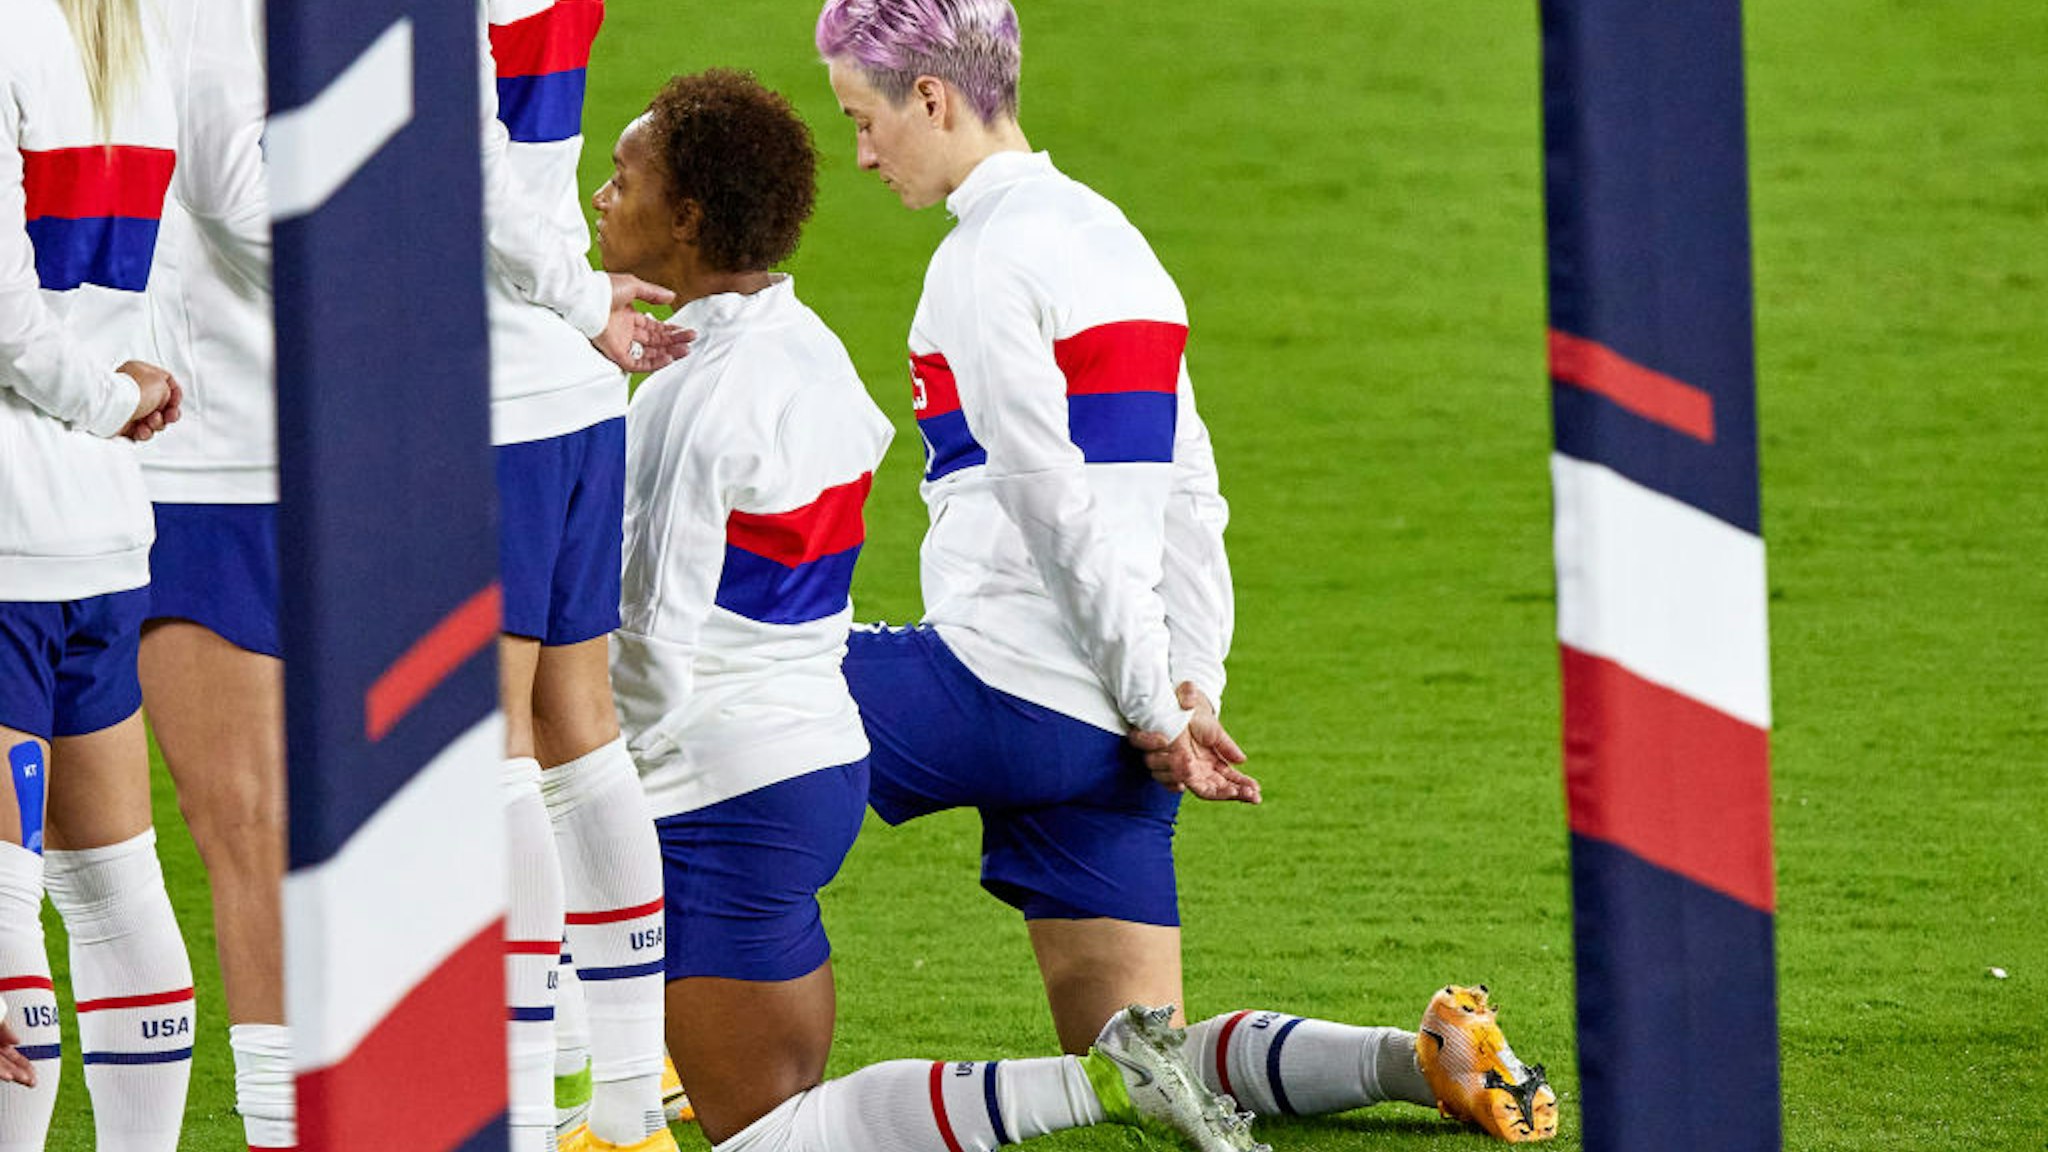 ORLANDO, FL - JANUARY 18: Several United States players including United States forward Megan Rapinoe (15) and United States defender Crystal Dunn (19) are seen taking a kneel during the singing of the national anthem in action during an International friendly match between United States and Colombia on January 18, 2021, at Explora Stadium in Orlando, FL. (Photo by Robin Alam/Icon Sportswire via Getty Images)